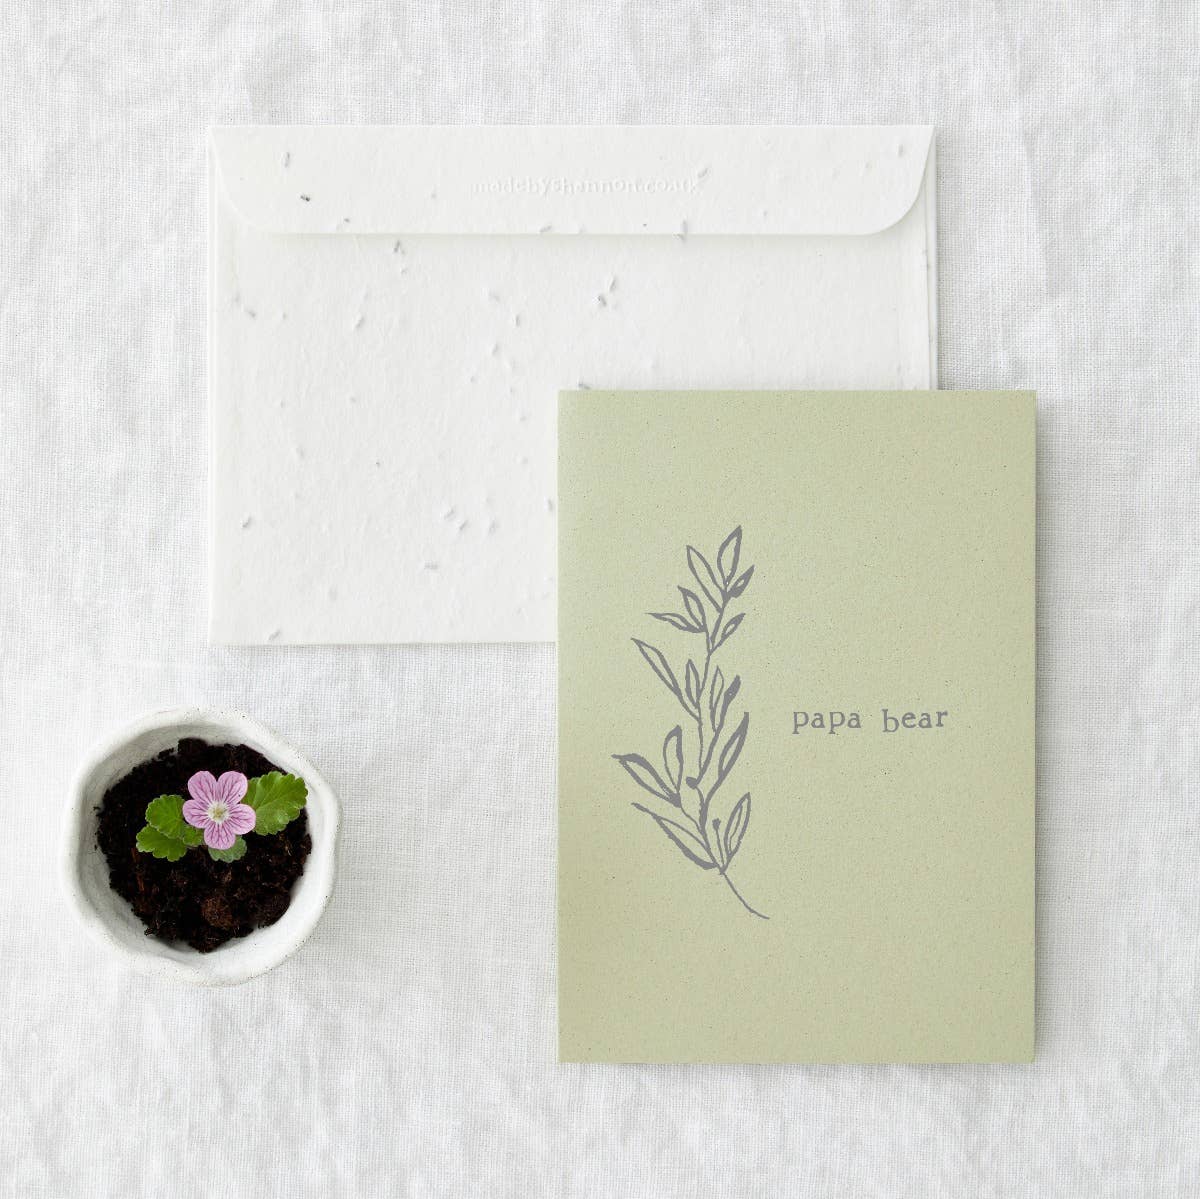 Papa Bear Greeting Card with Seeded Envelope